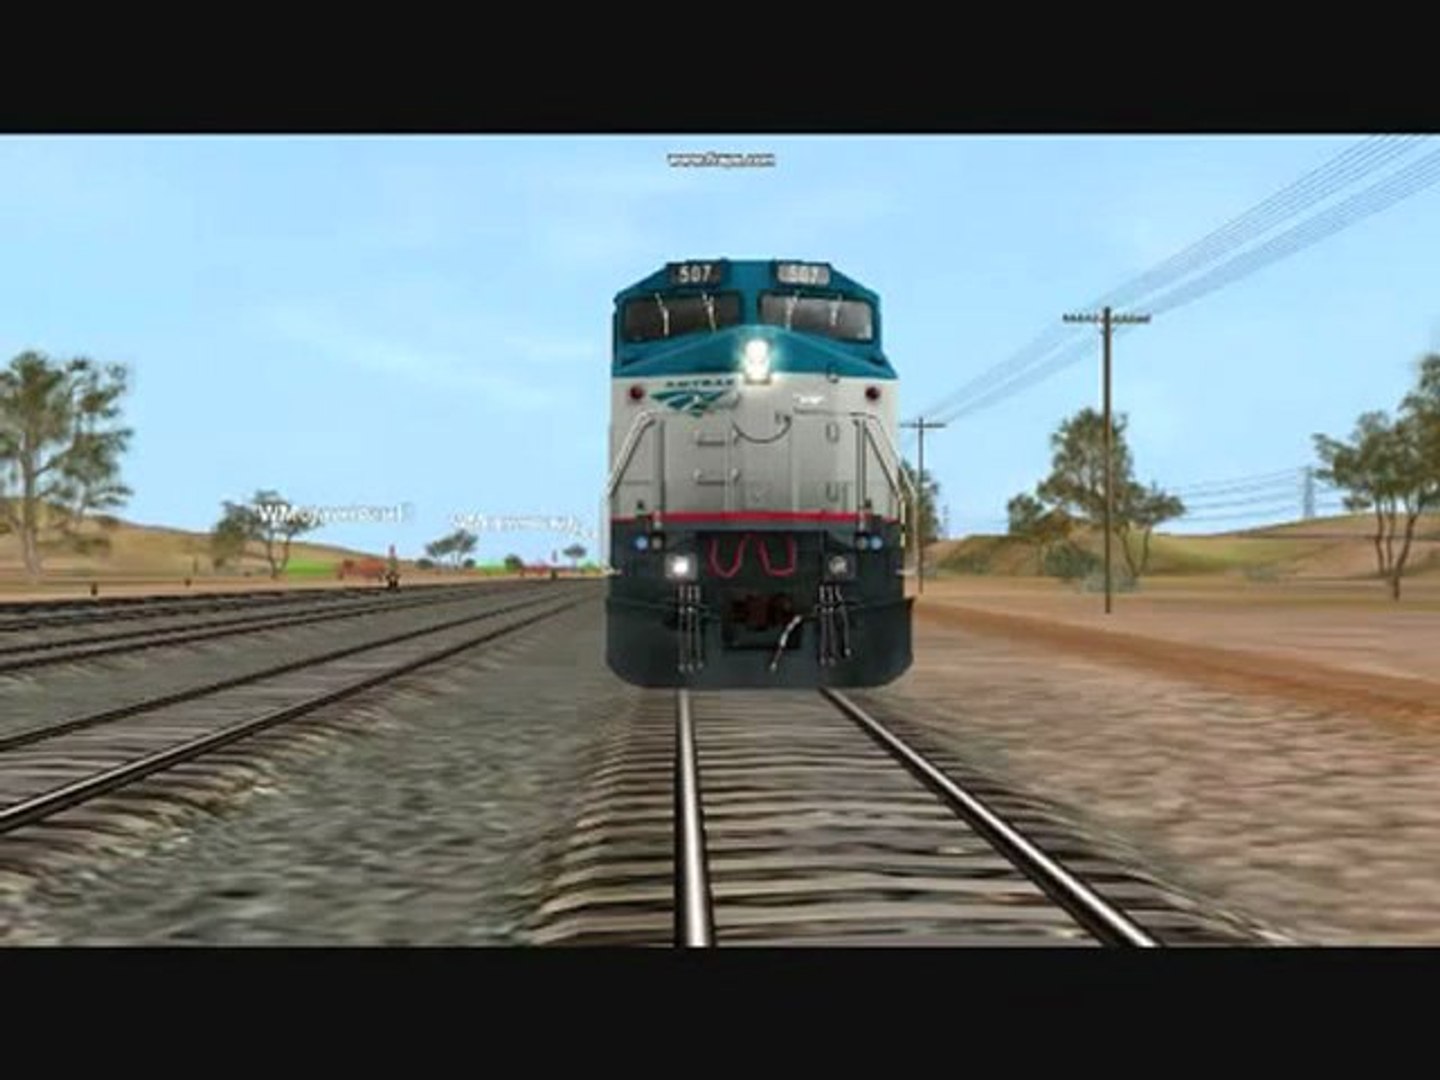 trainz simulator free download full version android